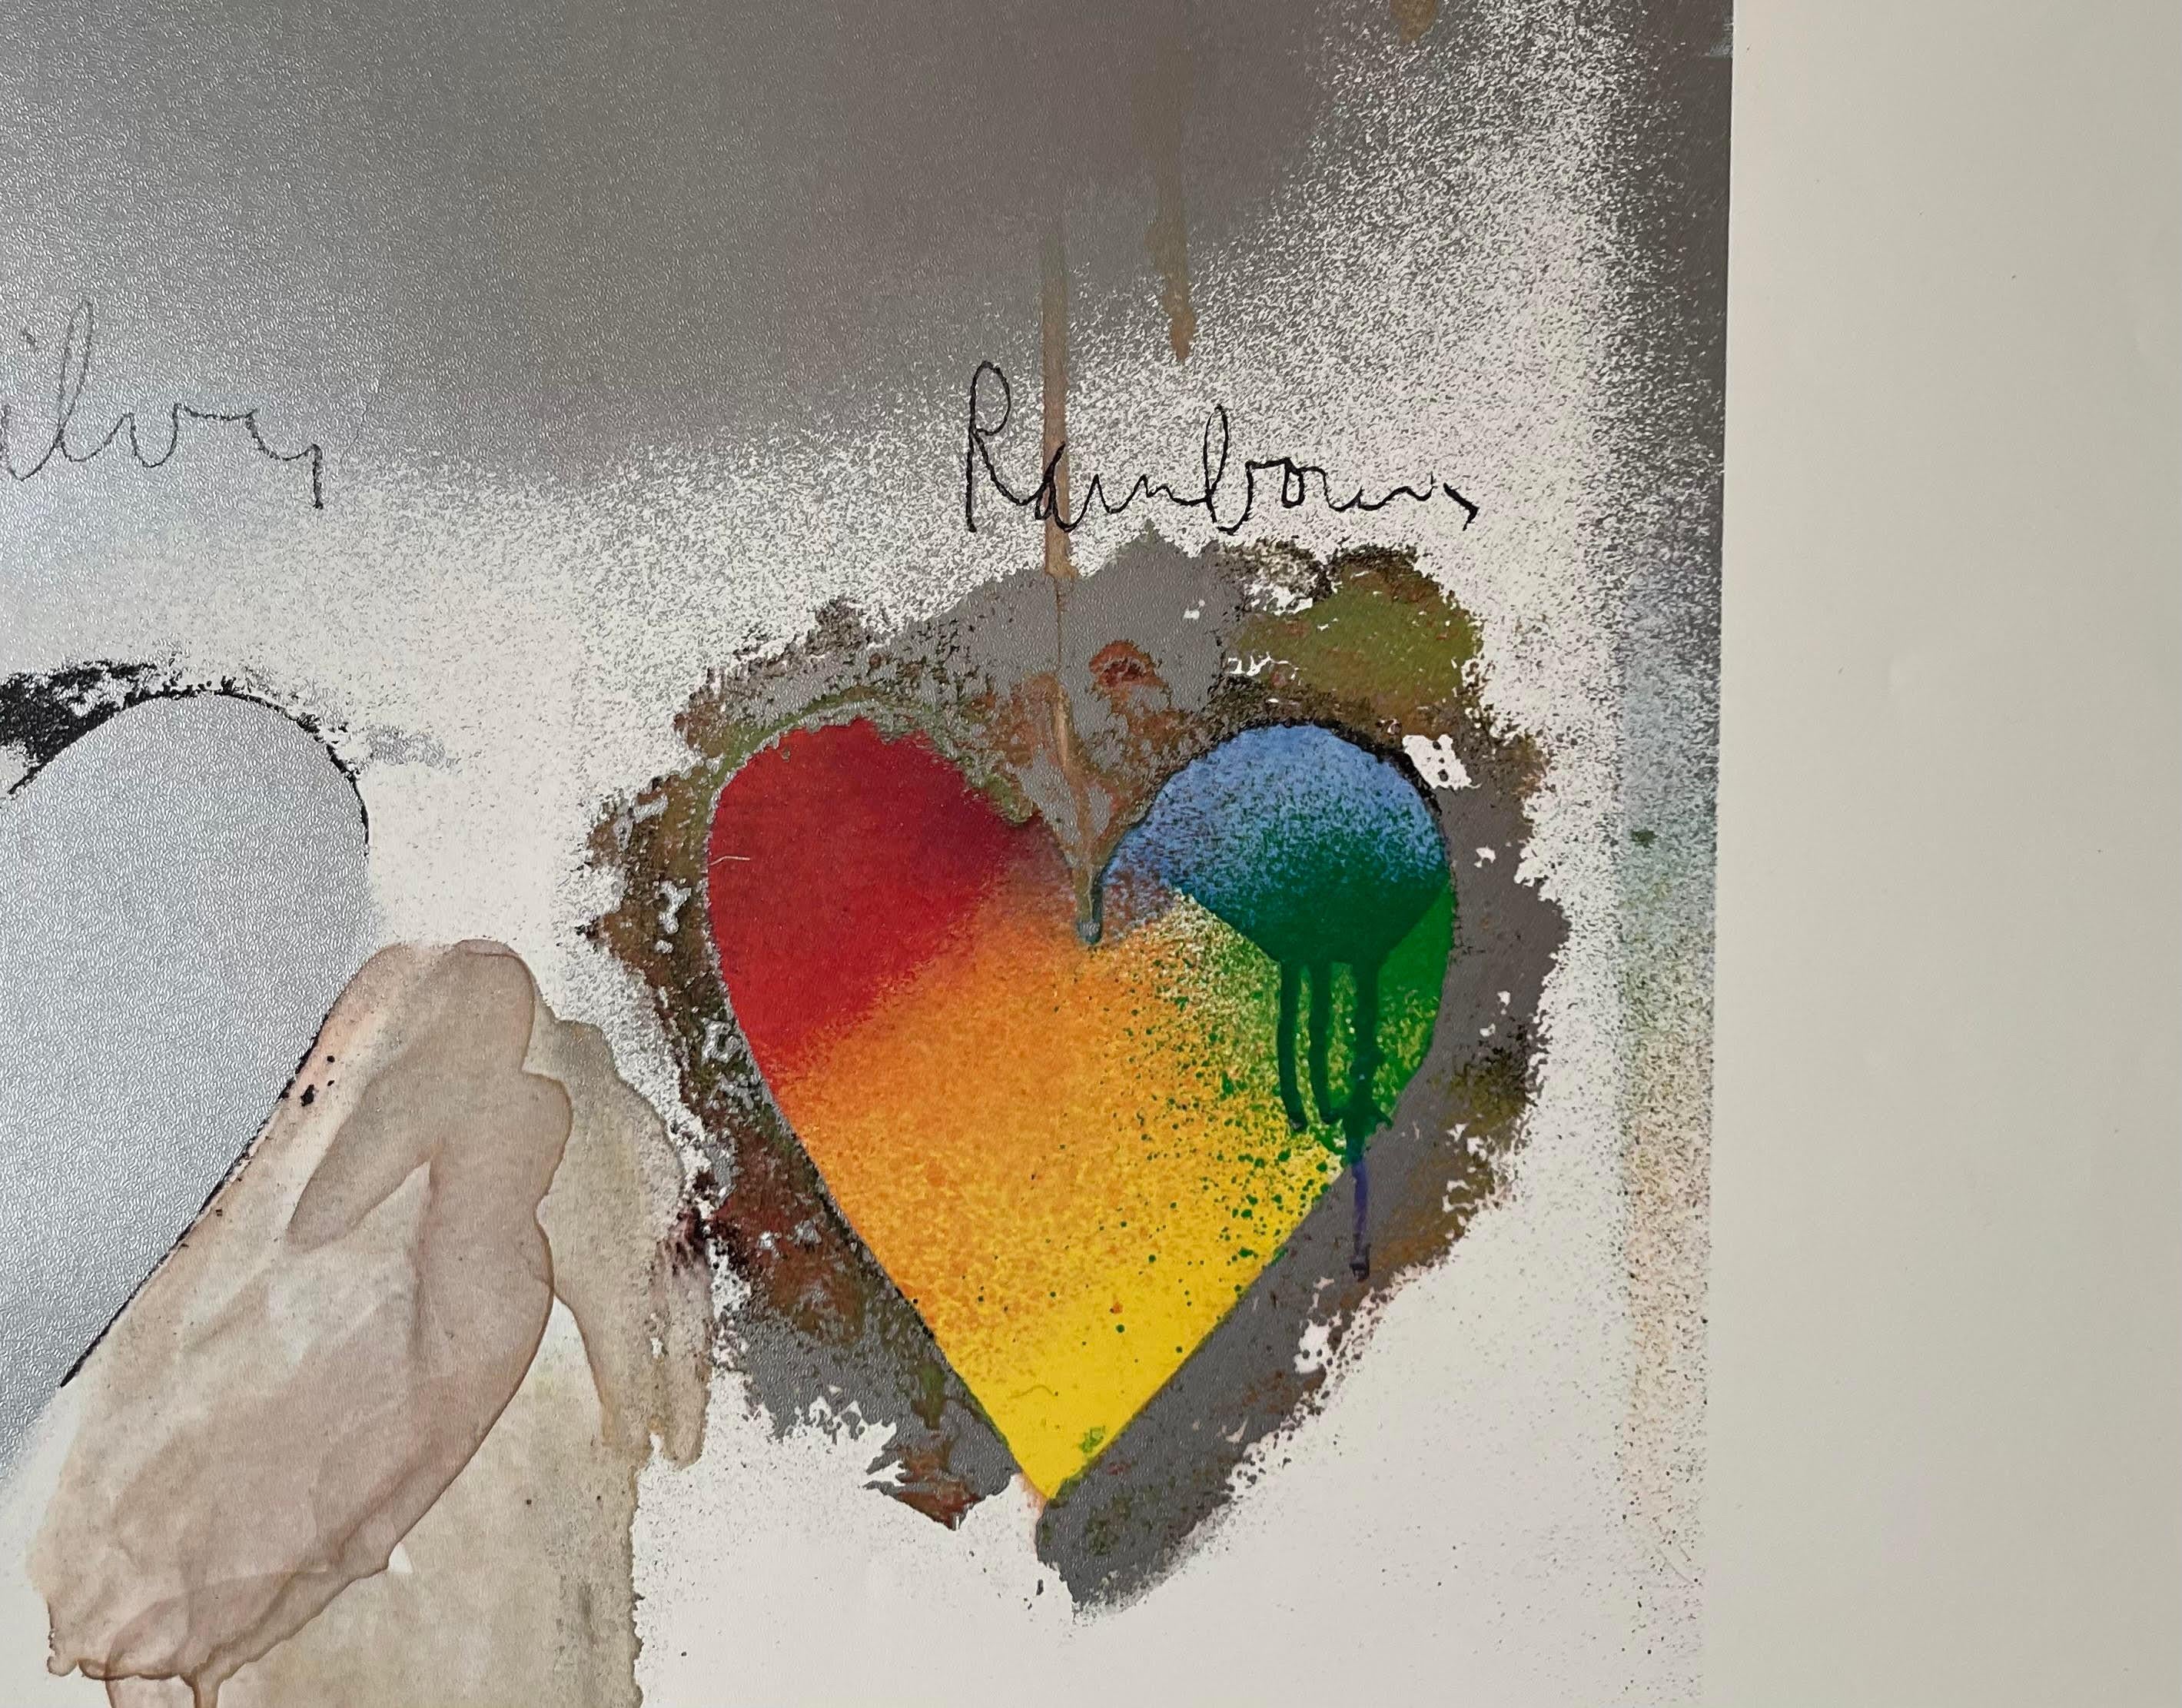 8 Hearts / Look, Lt. Ed Off-set Lithograph with metallic paper collage overlay - Pop Art Print by Jim Dine